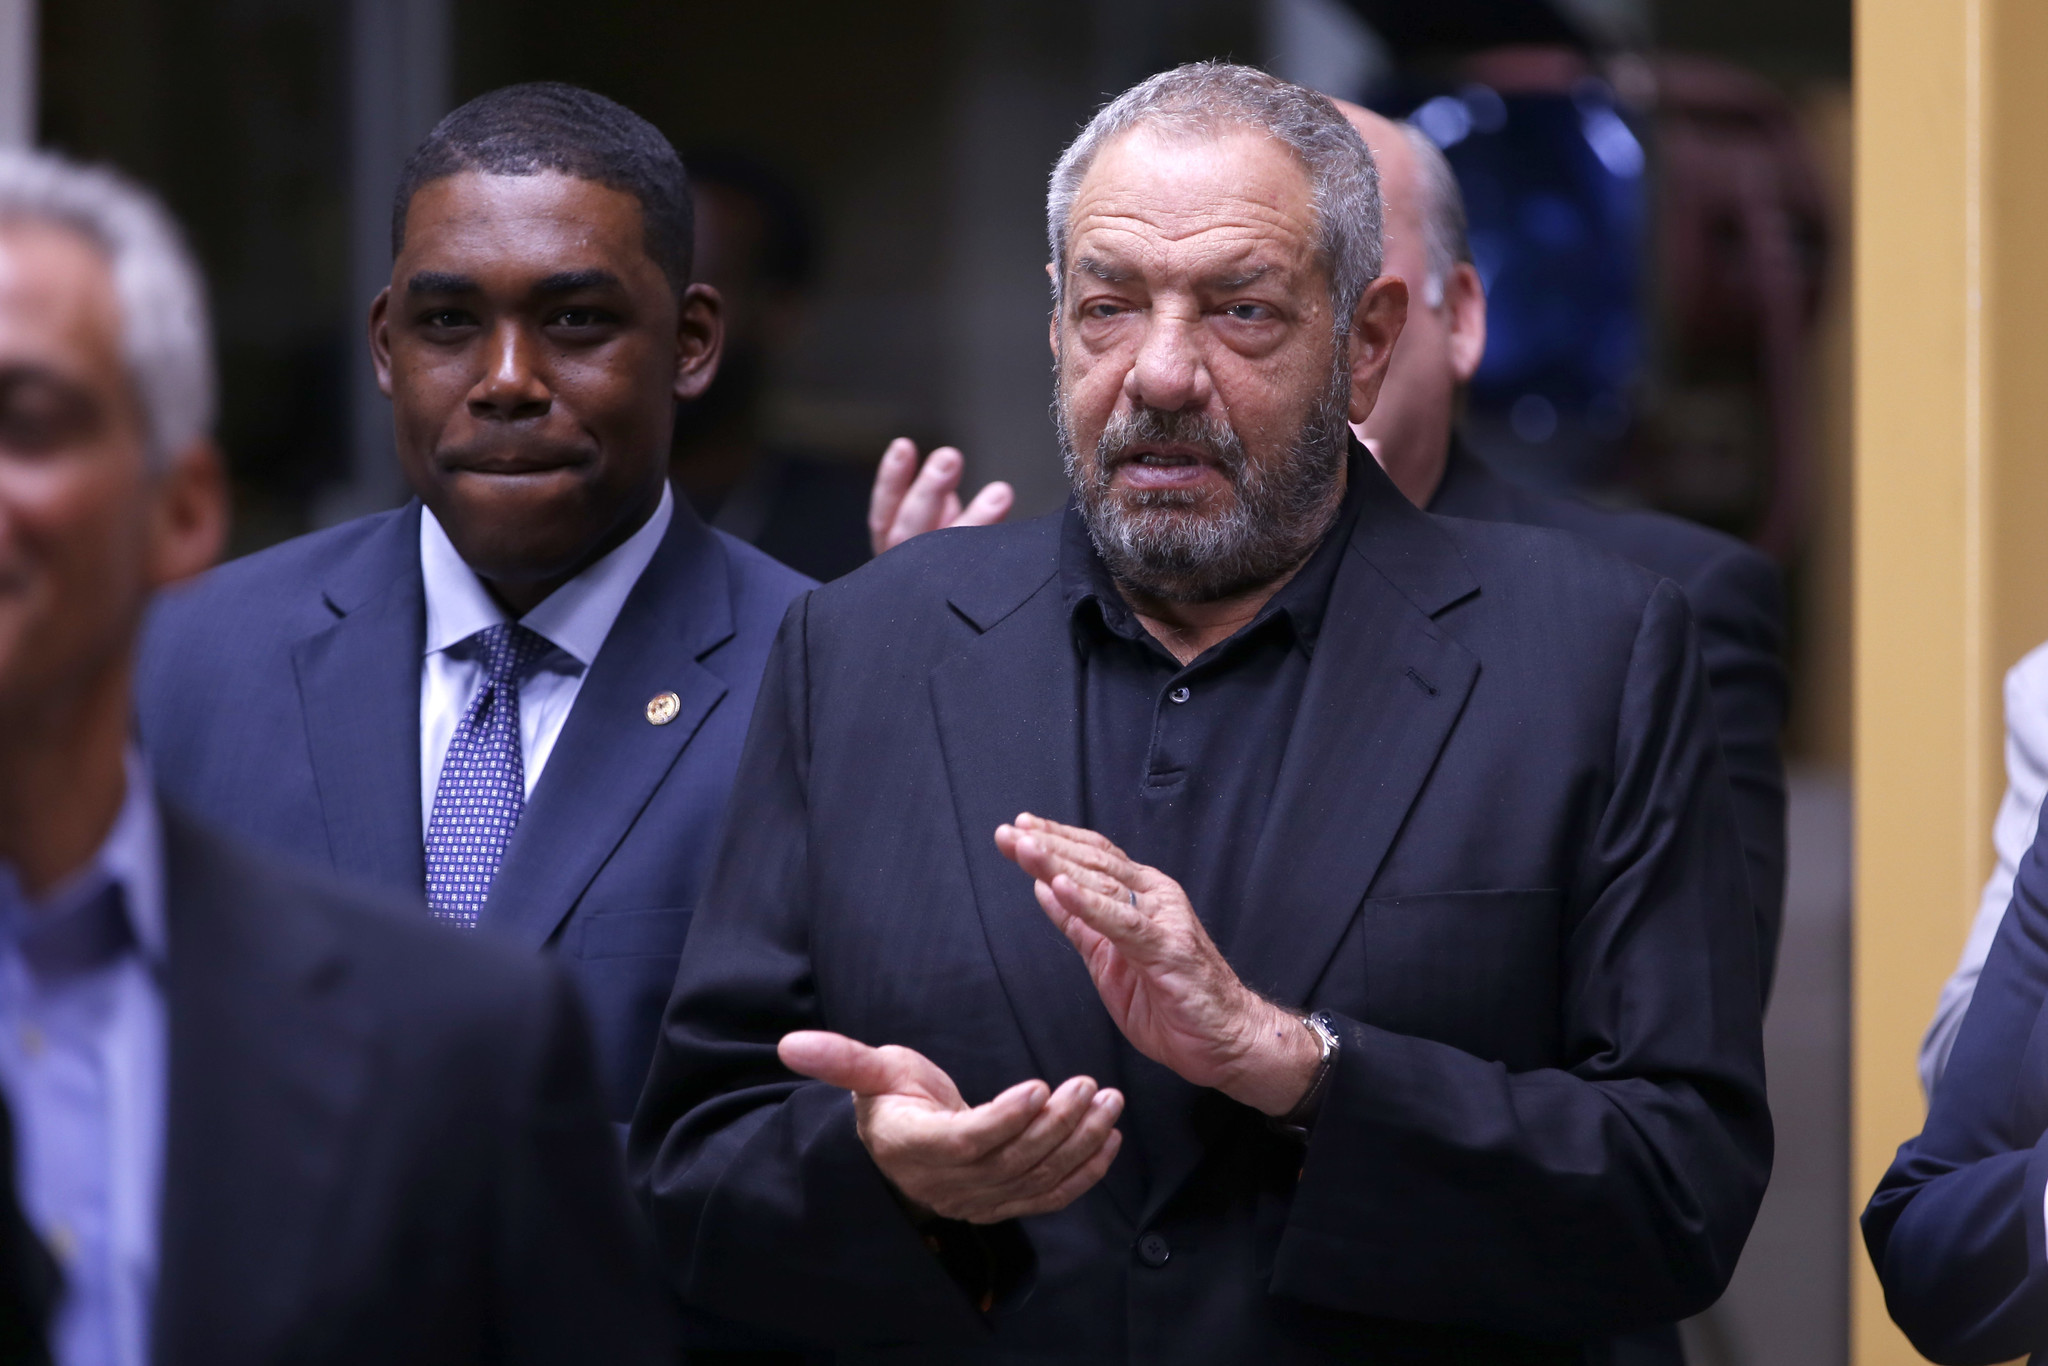 Dick Wolf lauds Chicago, insults its residents in West Side visit - Chicago Tribune